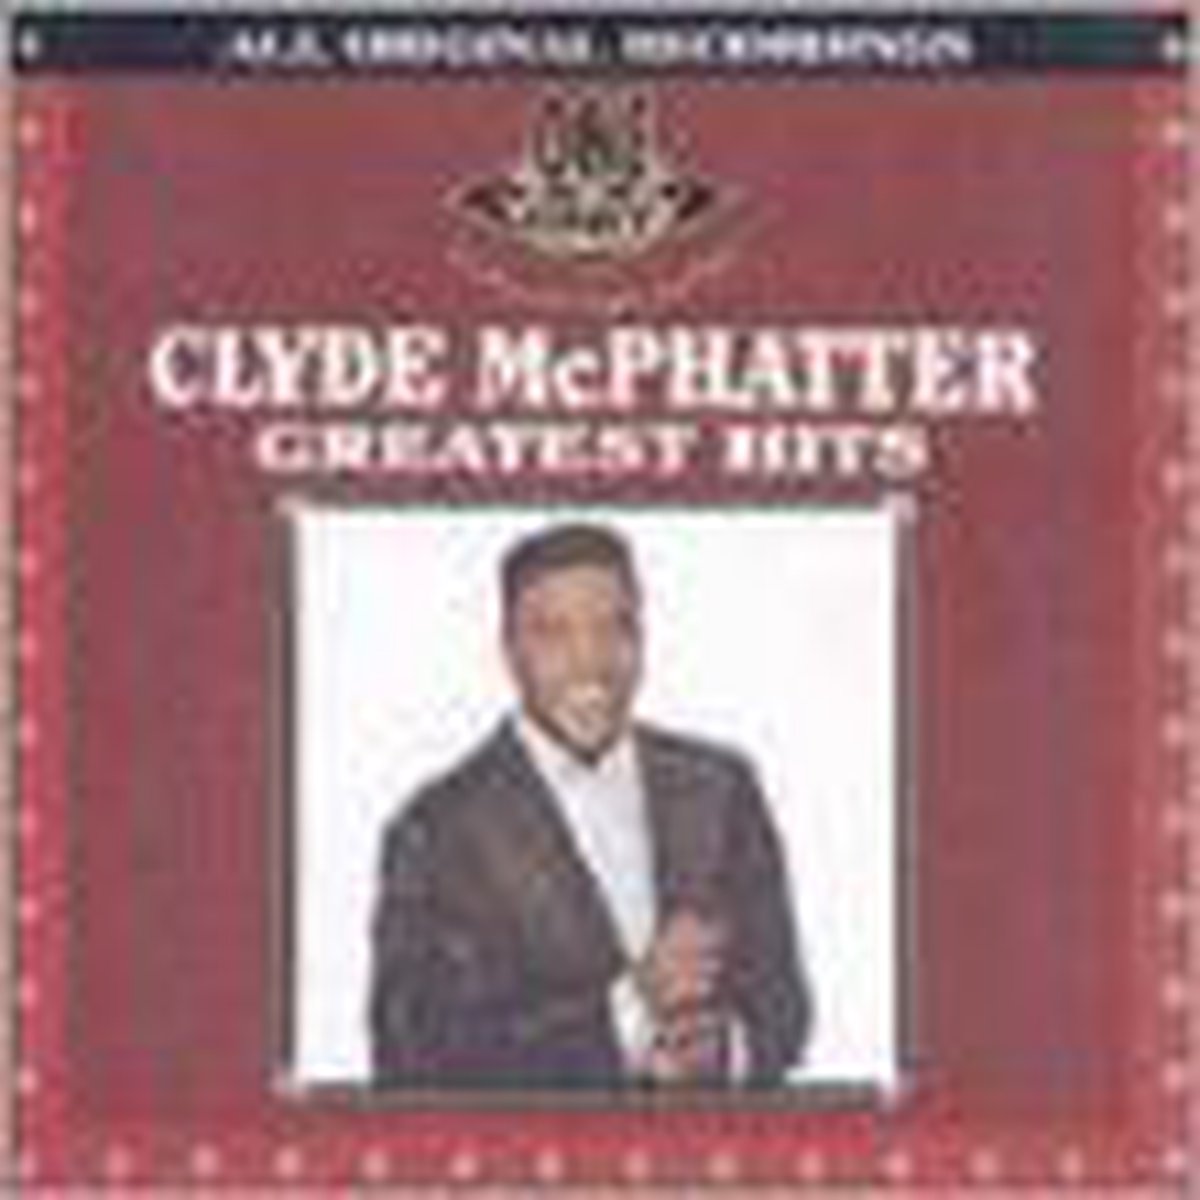 Greatest Hits - Clyde Mcphatter